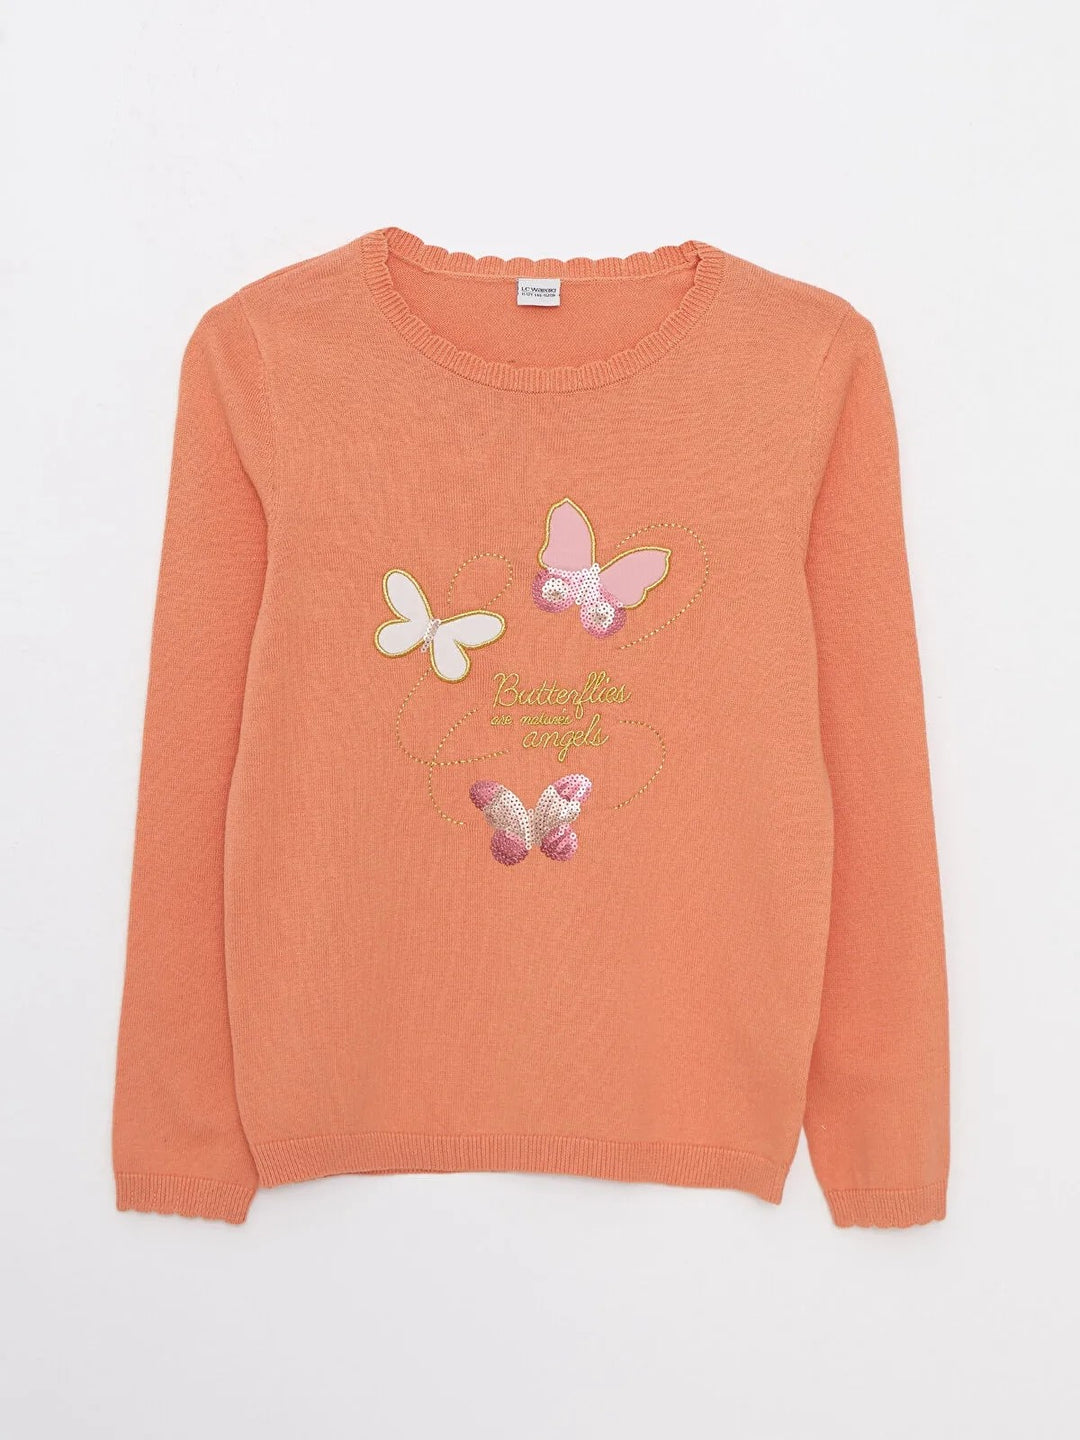 Crew Neck Embroidery Detailed Long Sleeve Girls Knitwear Sweater